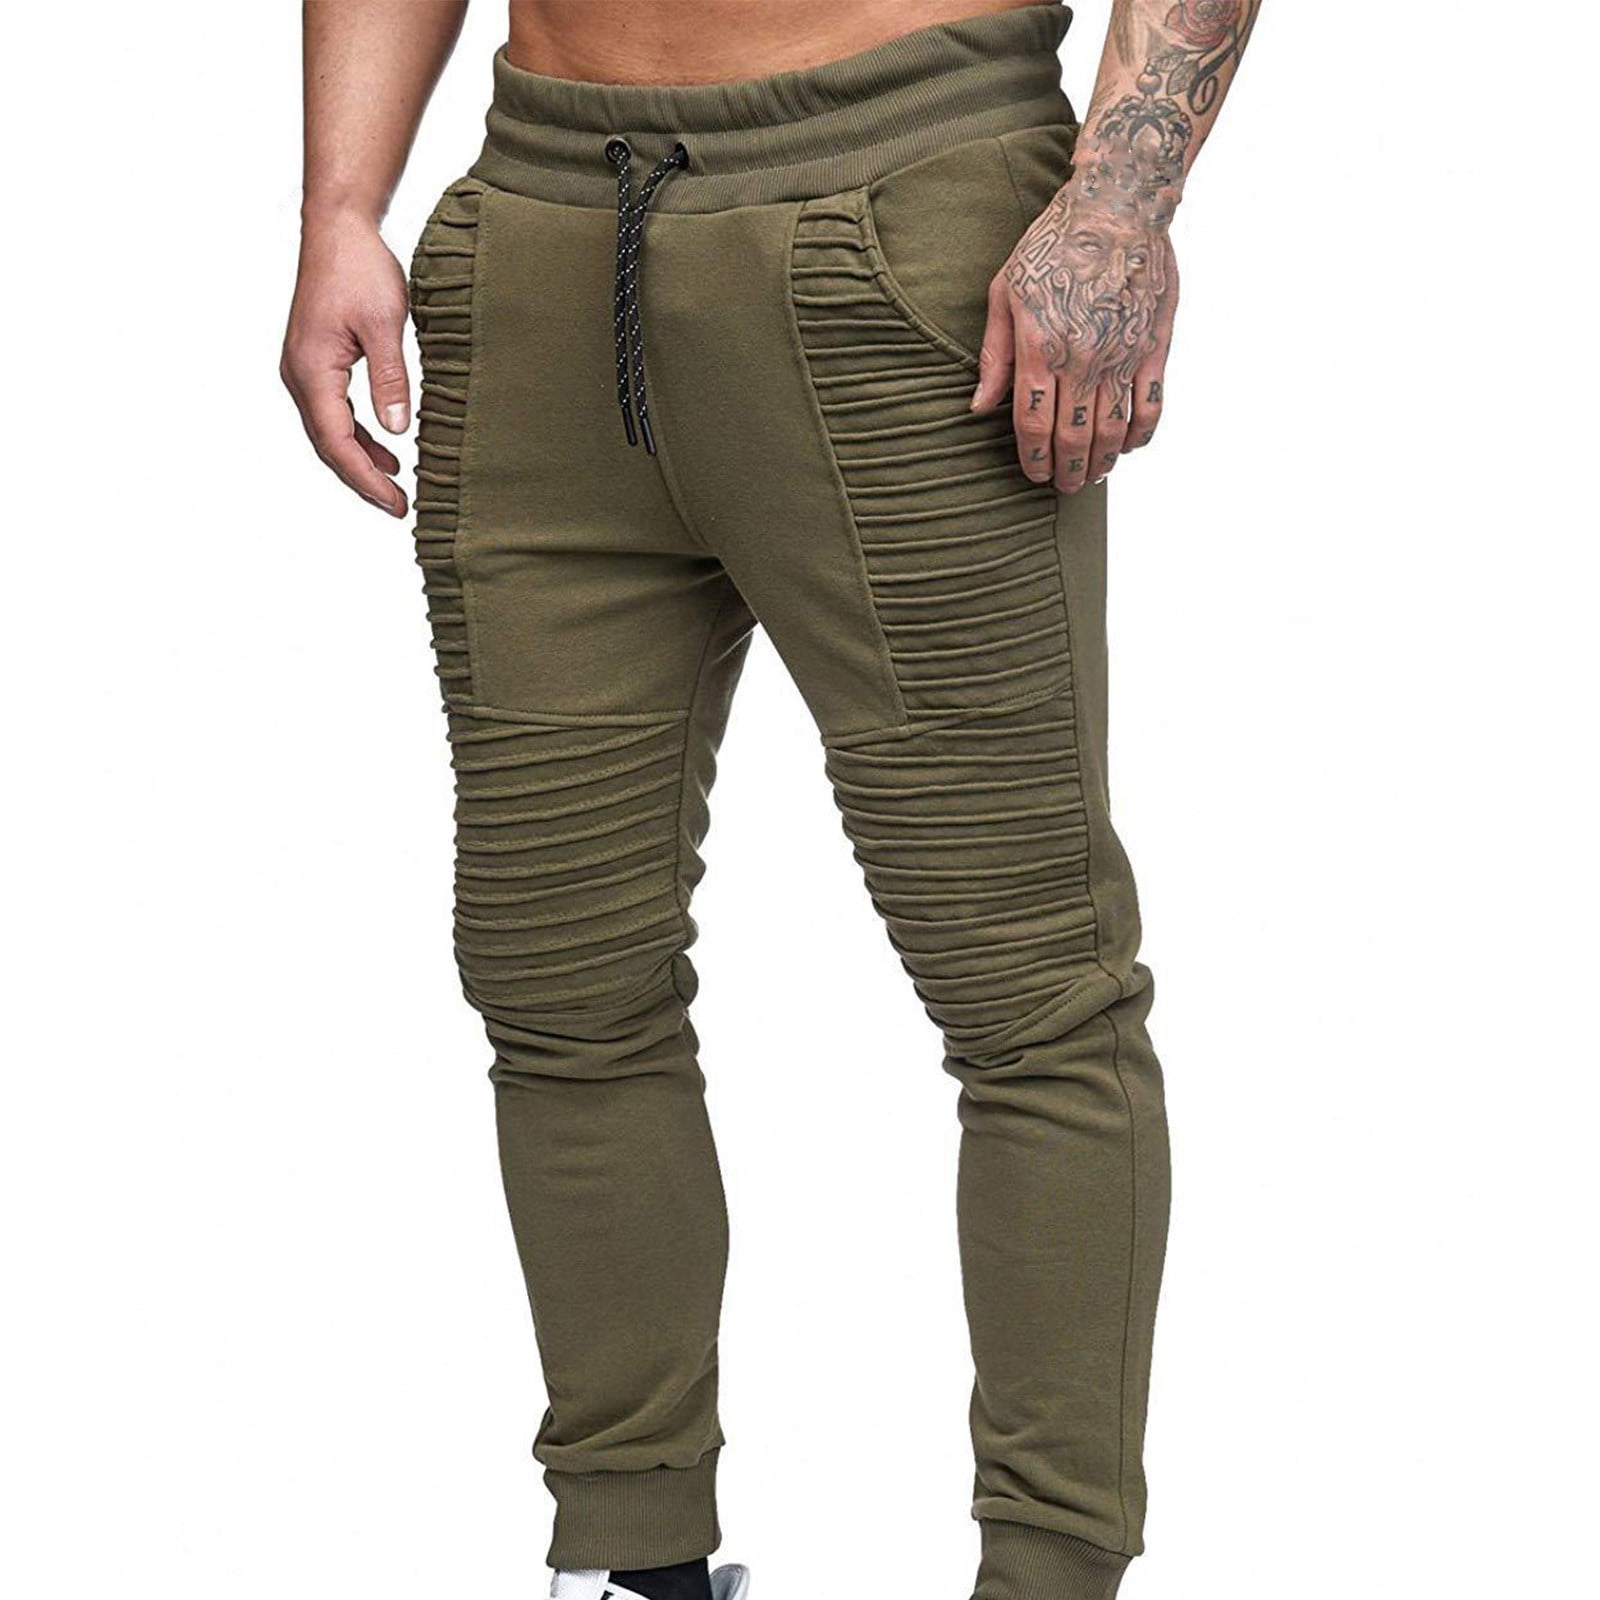 YYDGH On Clearance Men's Striped Tight Sweatpants Drawstring Hip Hop  Joggers Elastic Waist Fitness Jogger Pants for Workout Sports  Activewear(Army Green,XXL) 